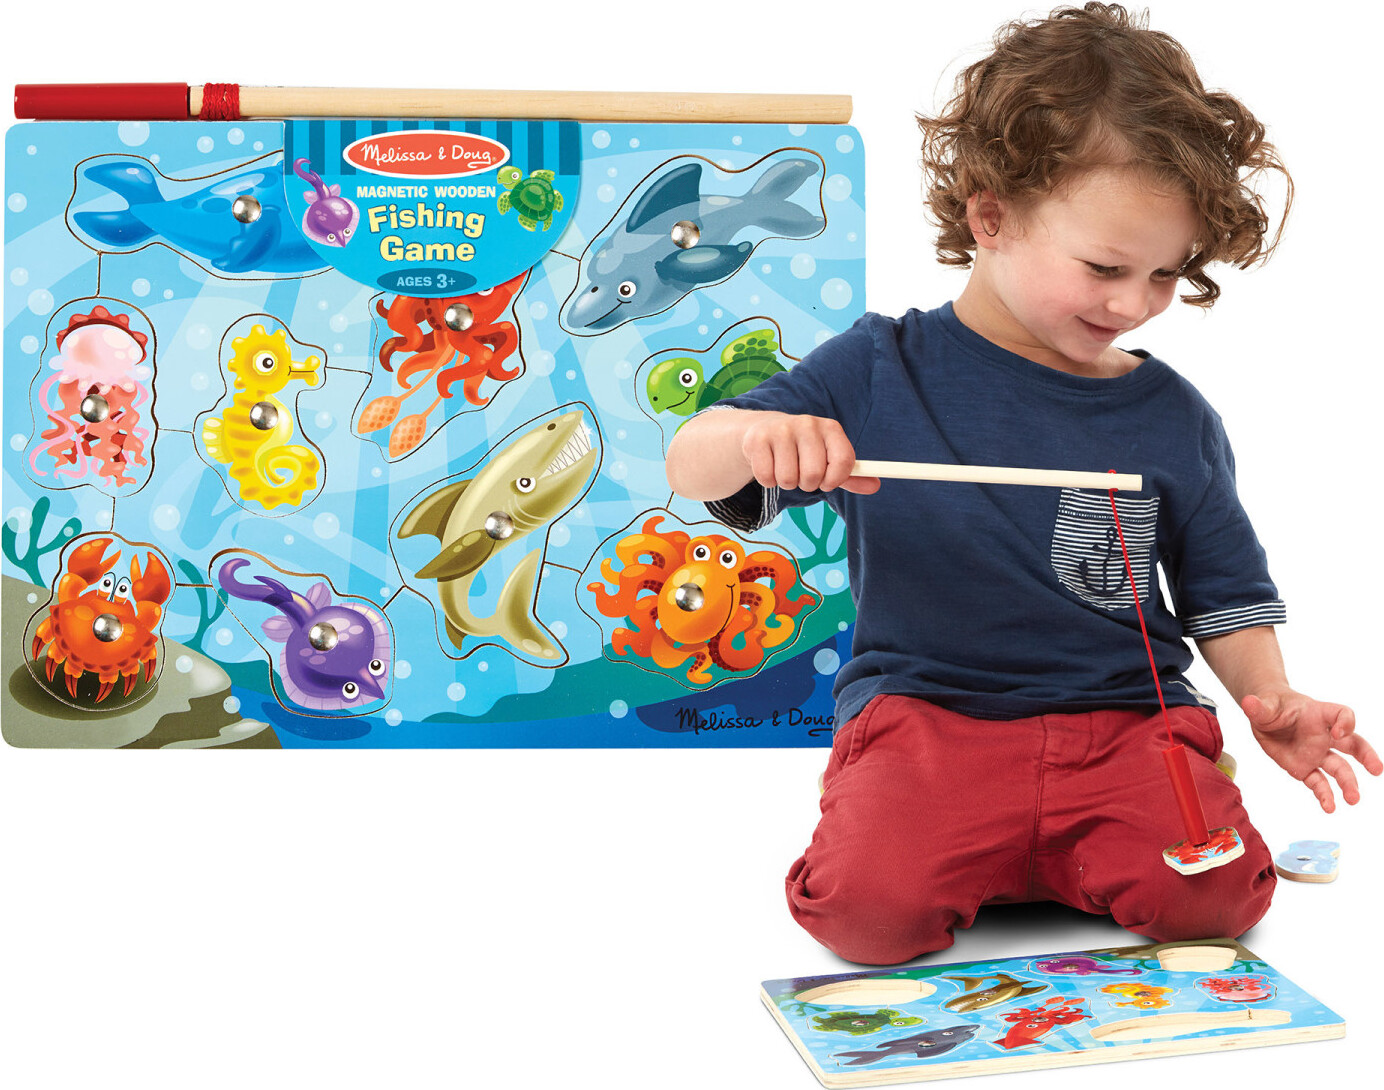 Magnetic Fishing Game for sale, Shop with Afterpay